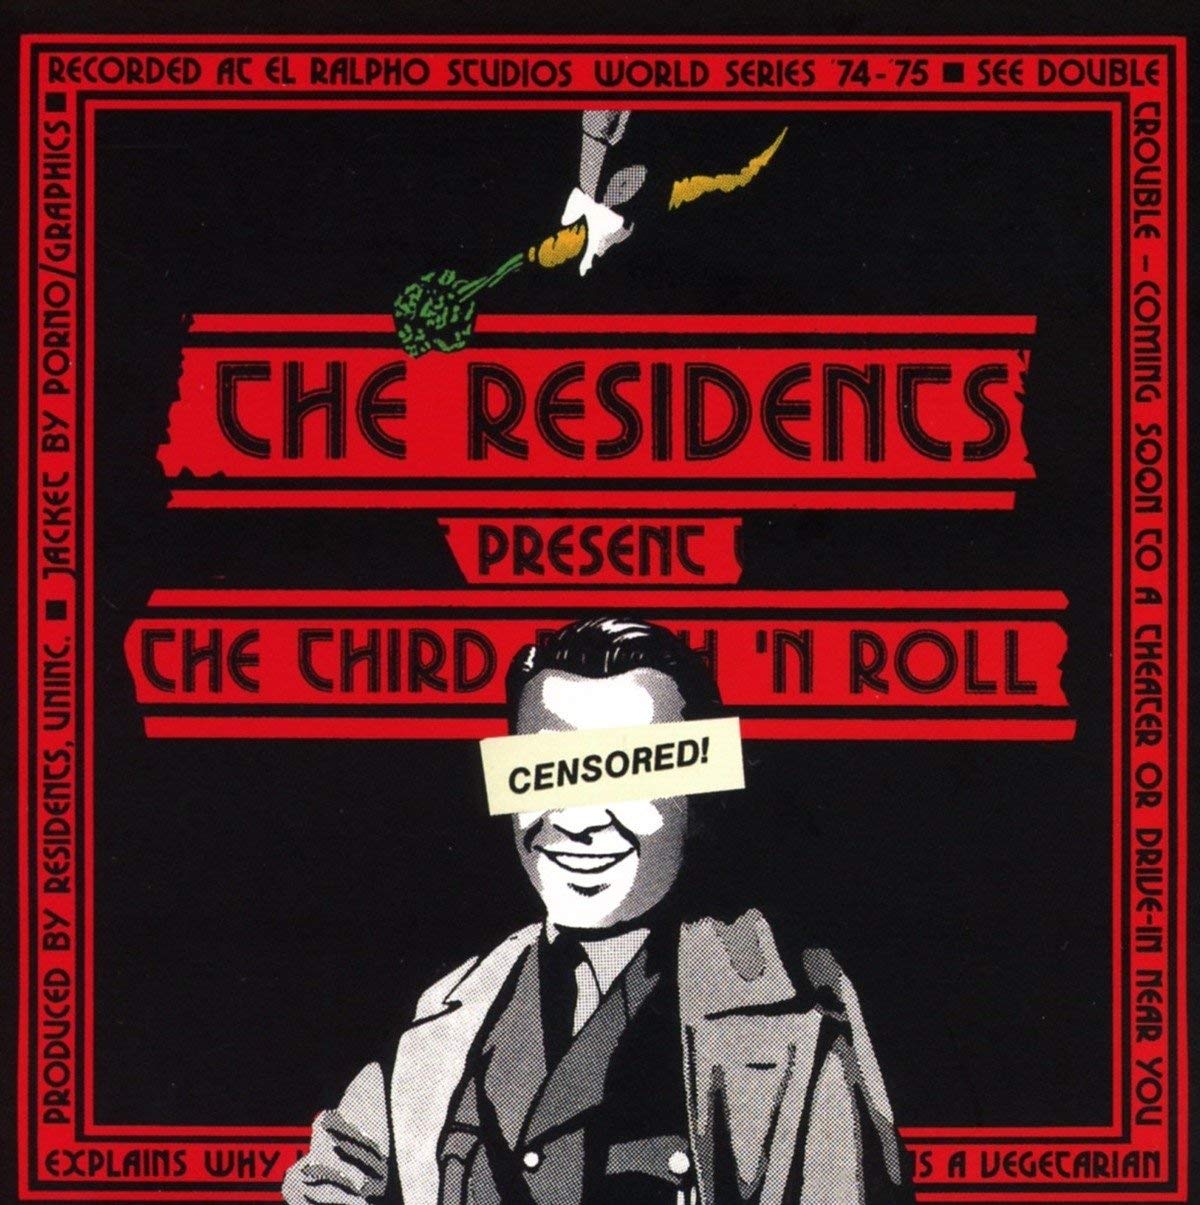 The Residents - The Third Reich 'N Roll - pREServed Edition - 2CD